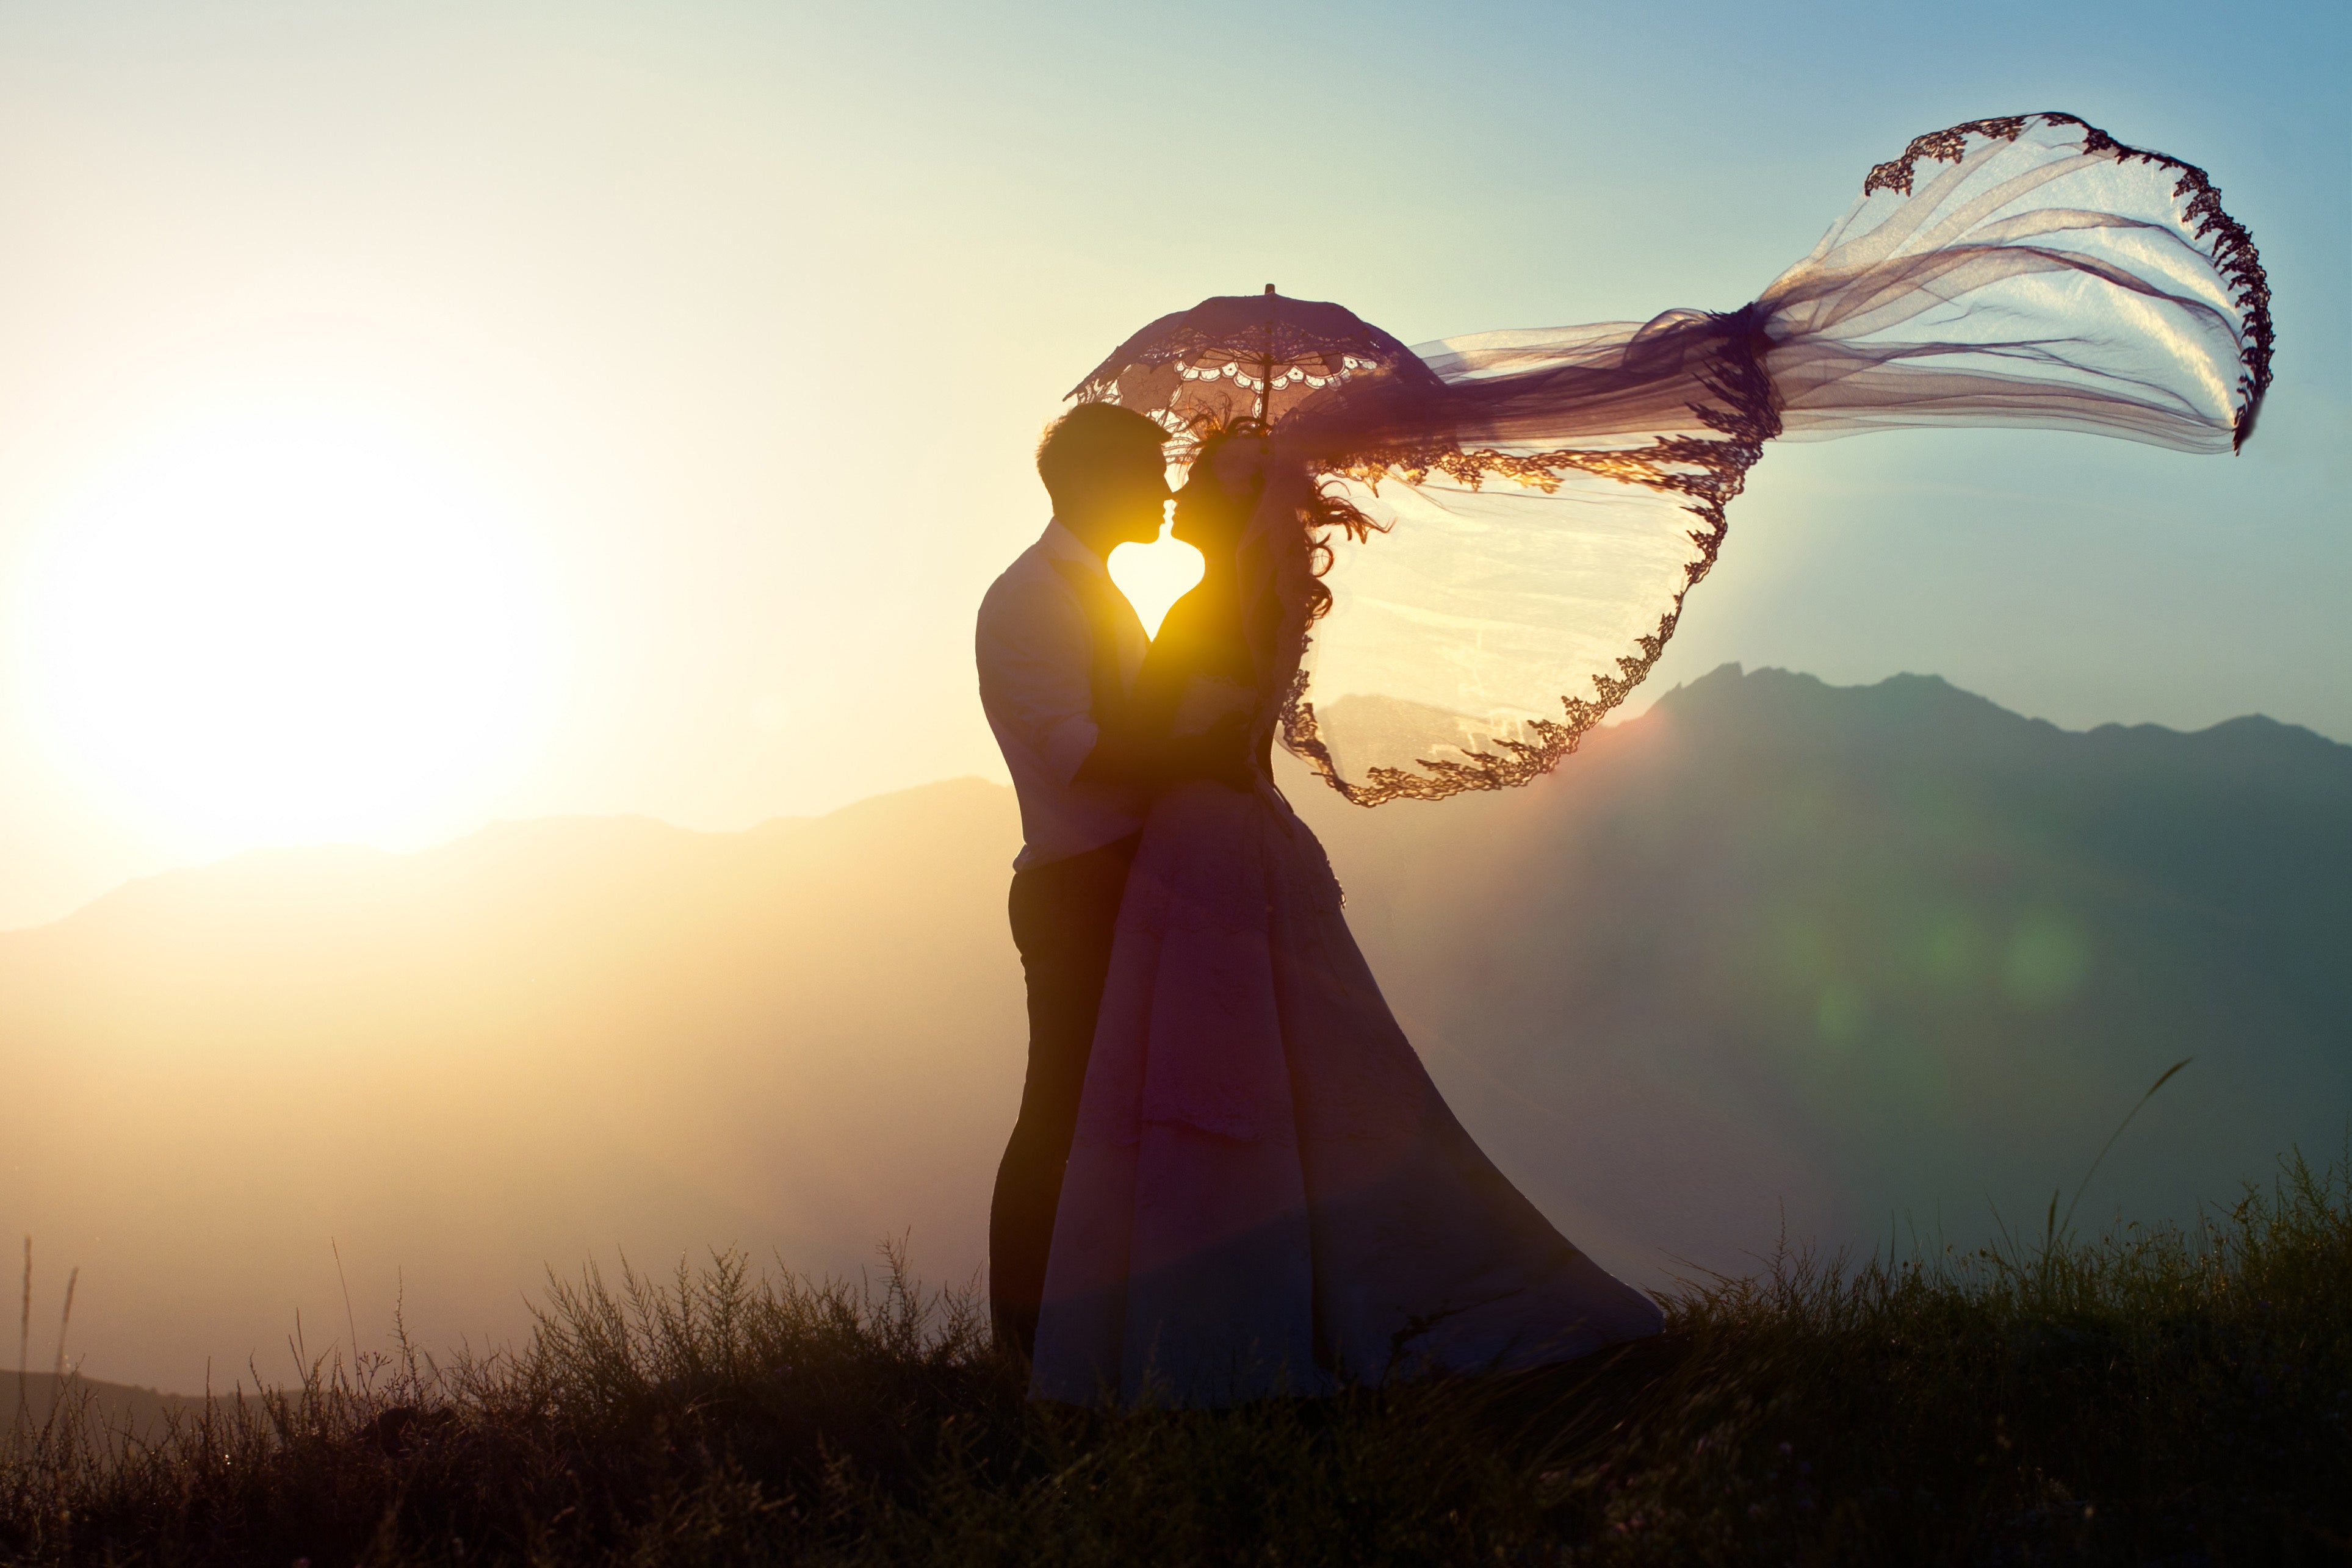 Bride and groom about to kiss in the sunset with creative lighting